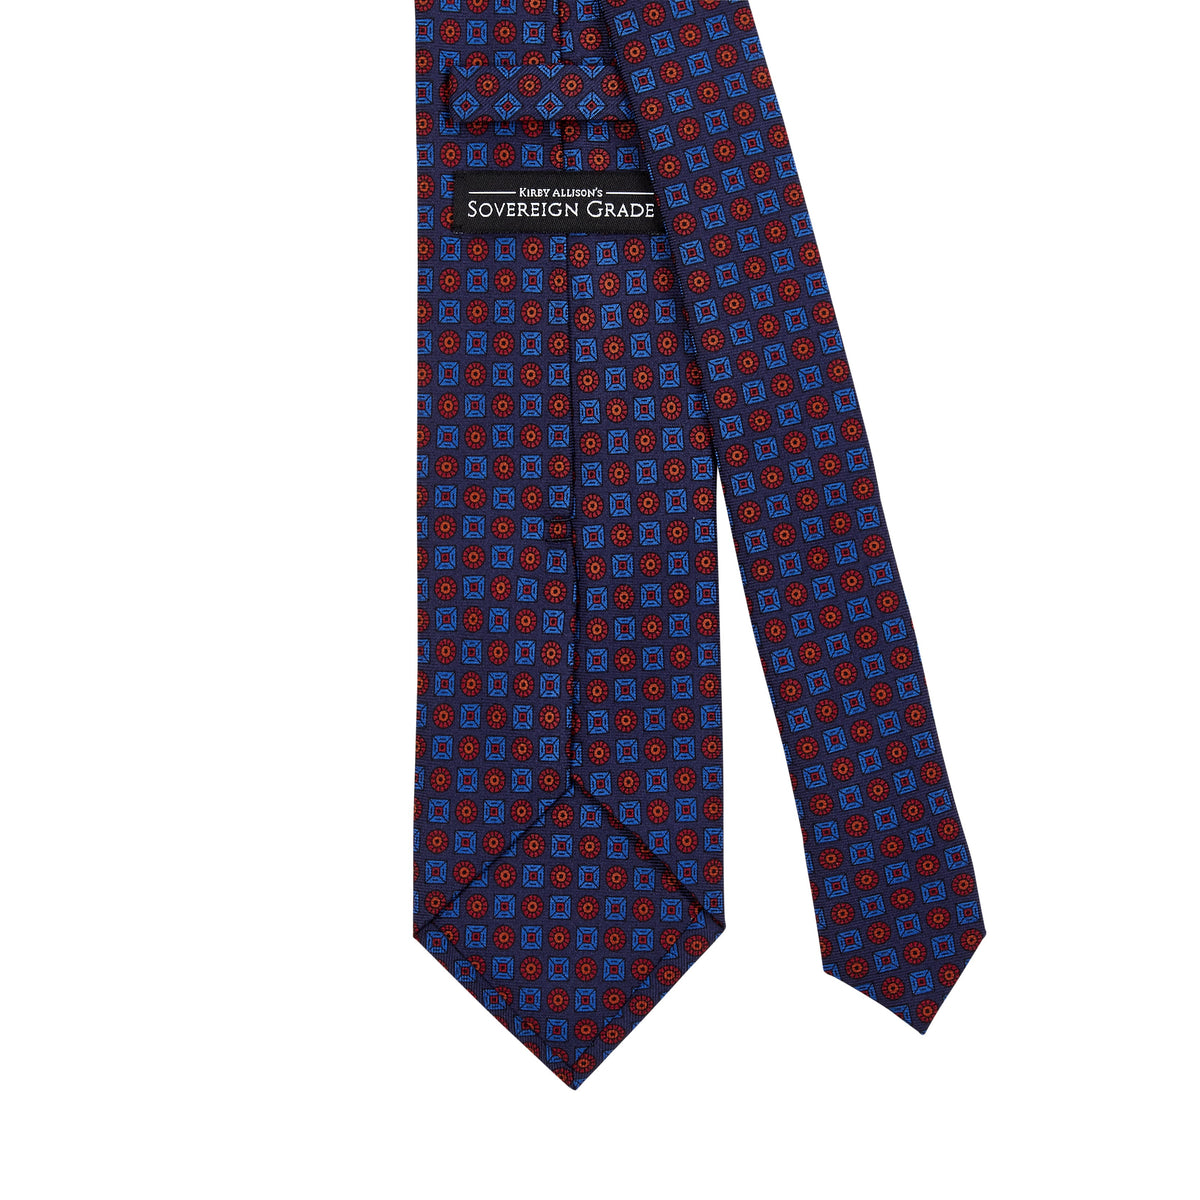 A Sovereign Grade Navy Ancient Madder Tie by KirbyAllison.com, handmade with 100% English silk and featuring a polka dot pattern.